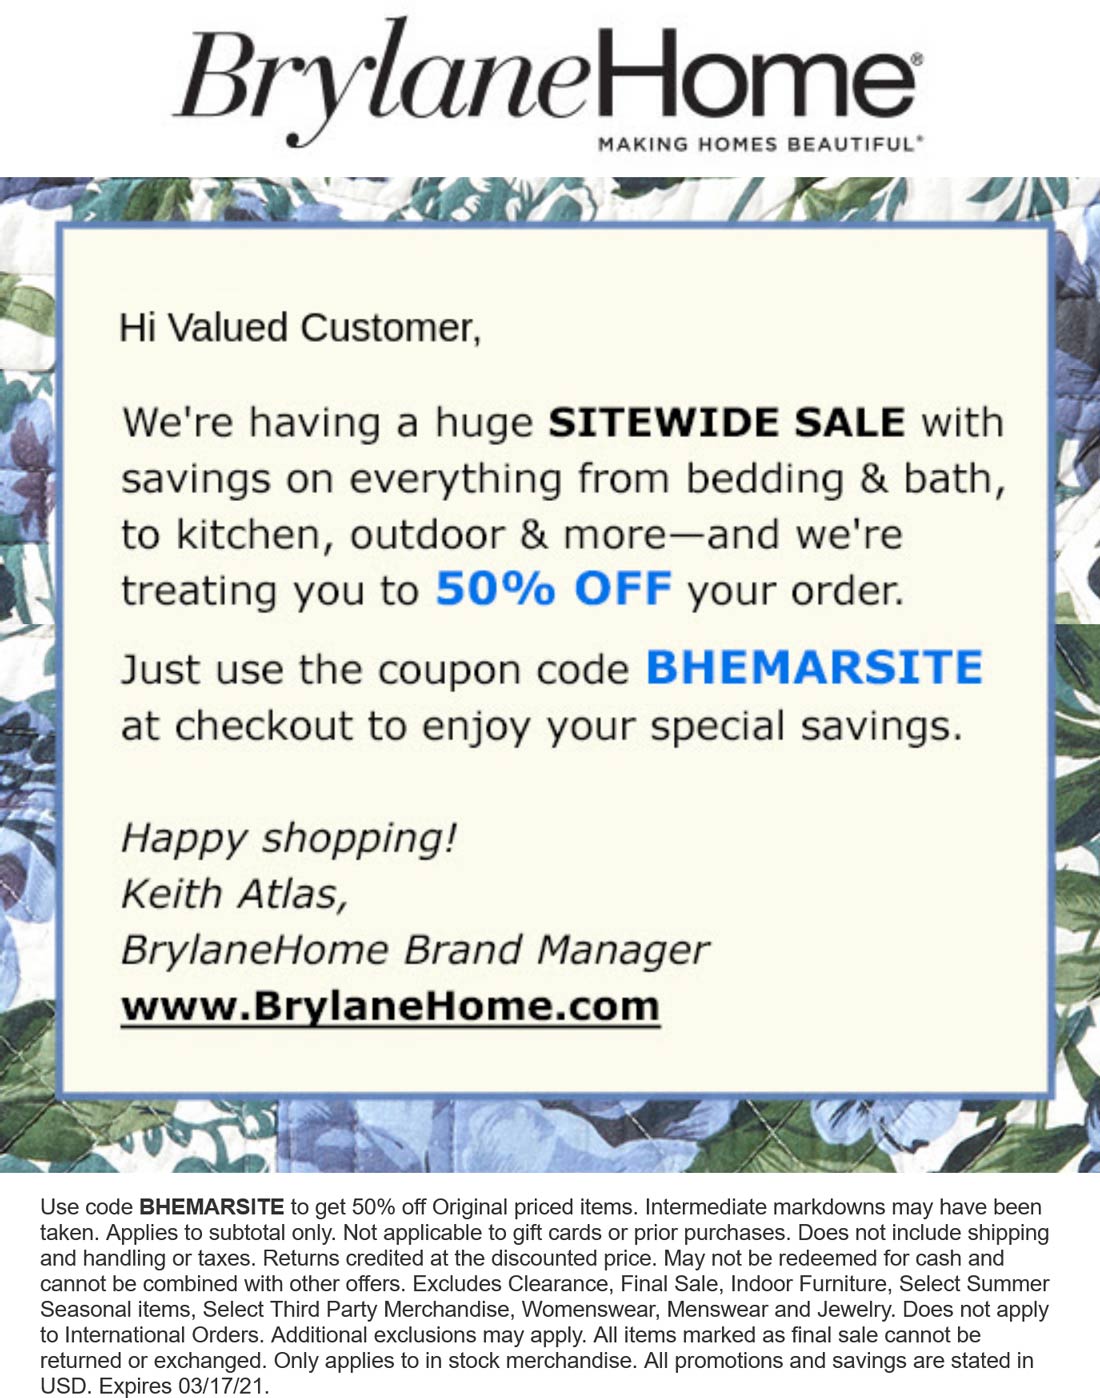 Brylane Home stores Coupon  50% off everything at Brylane Home via promo code BHEMARSITE #brylanehome 